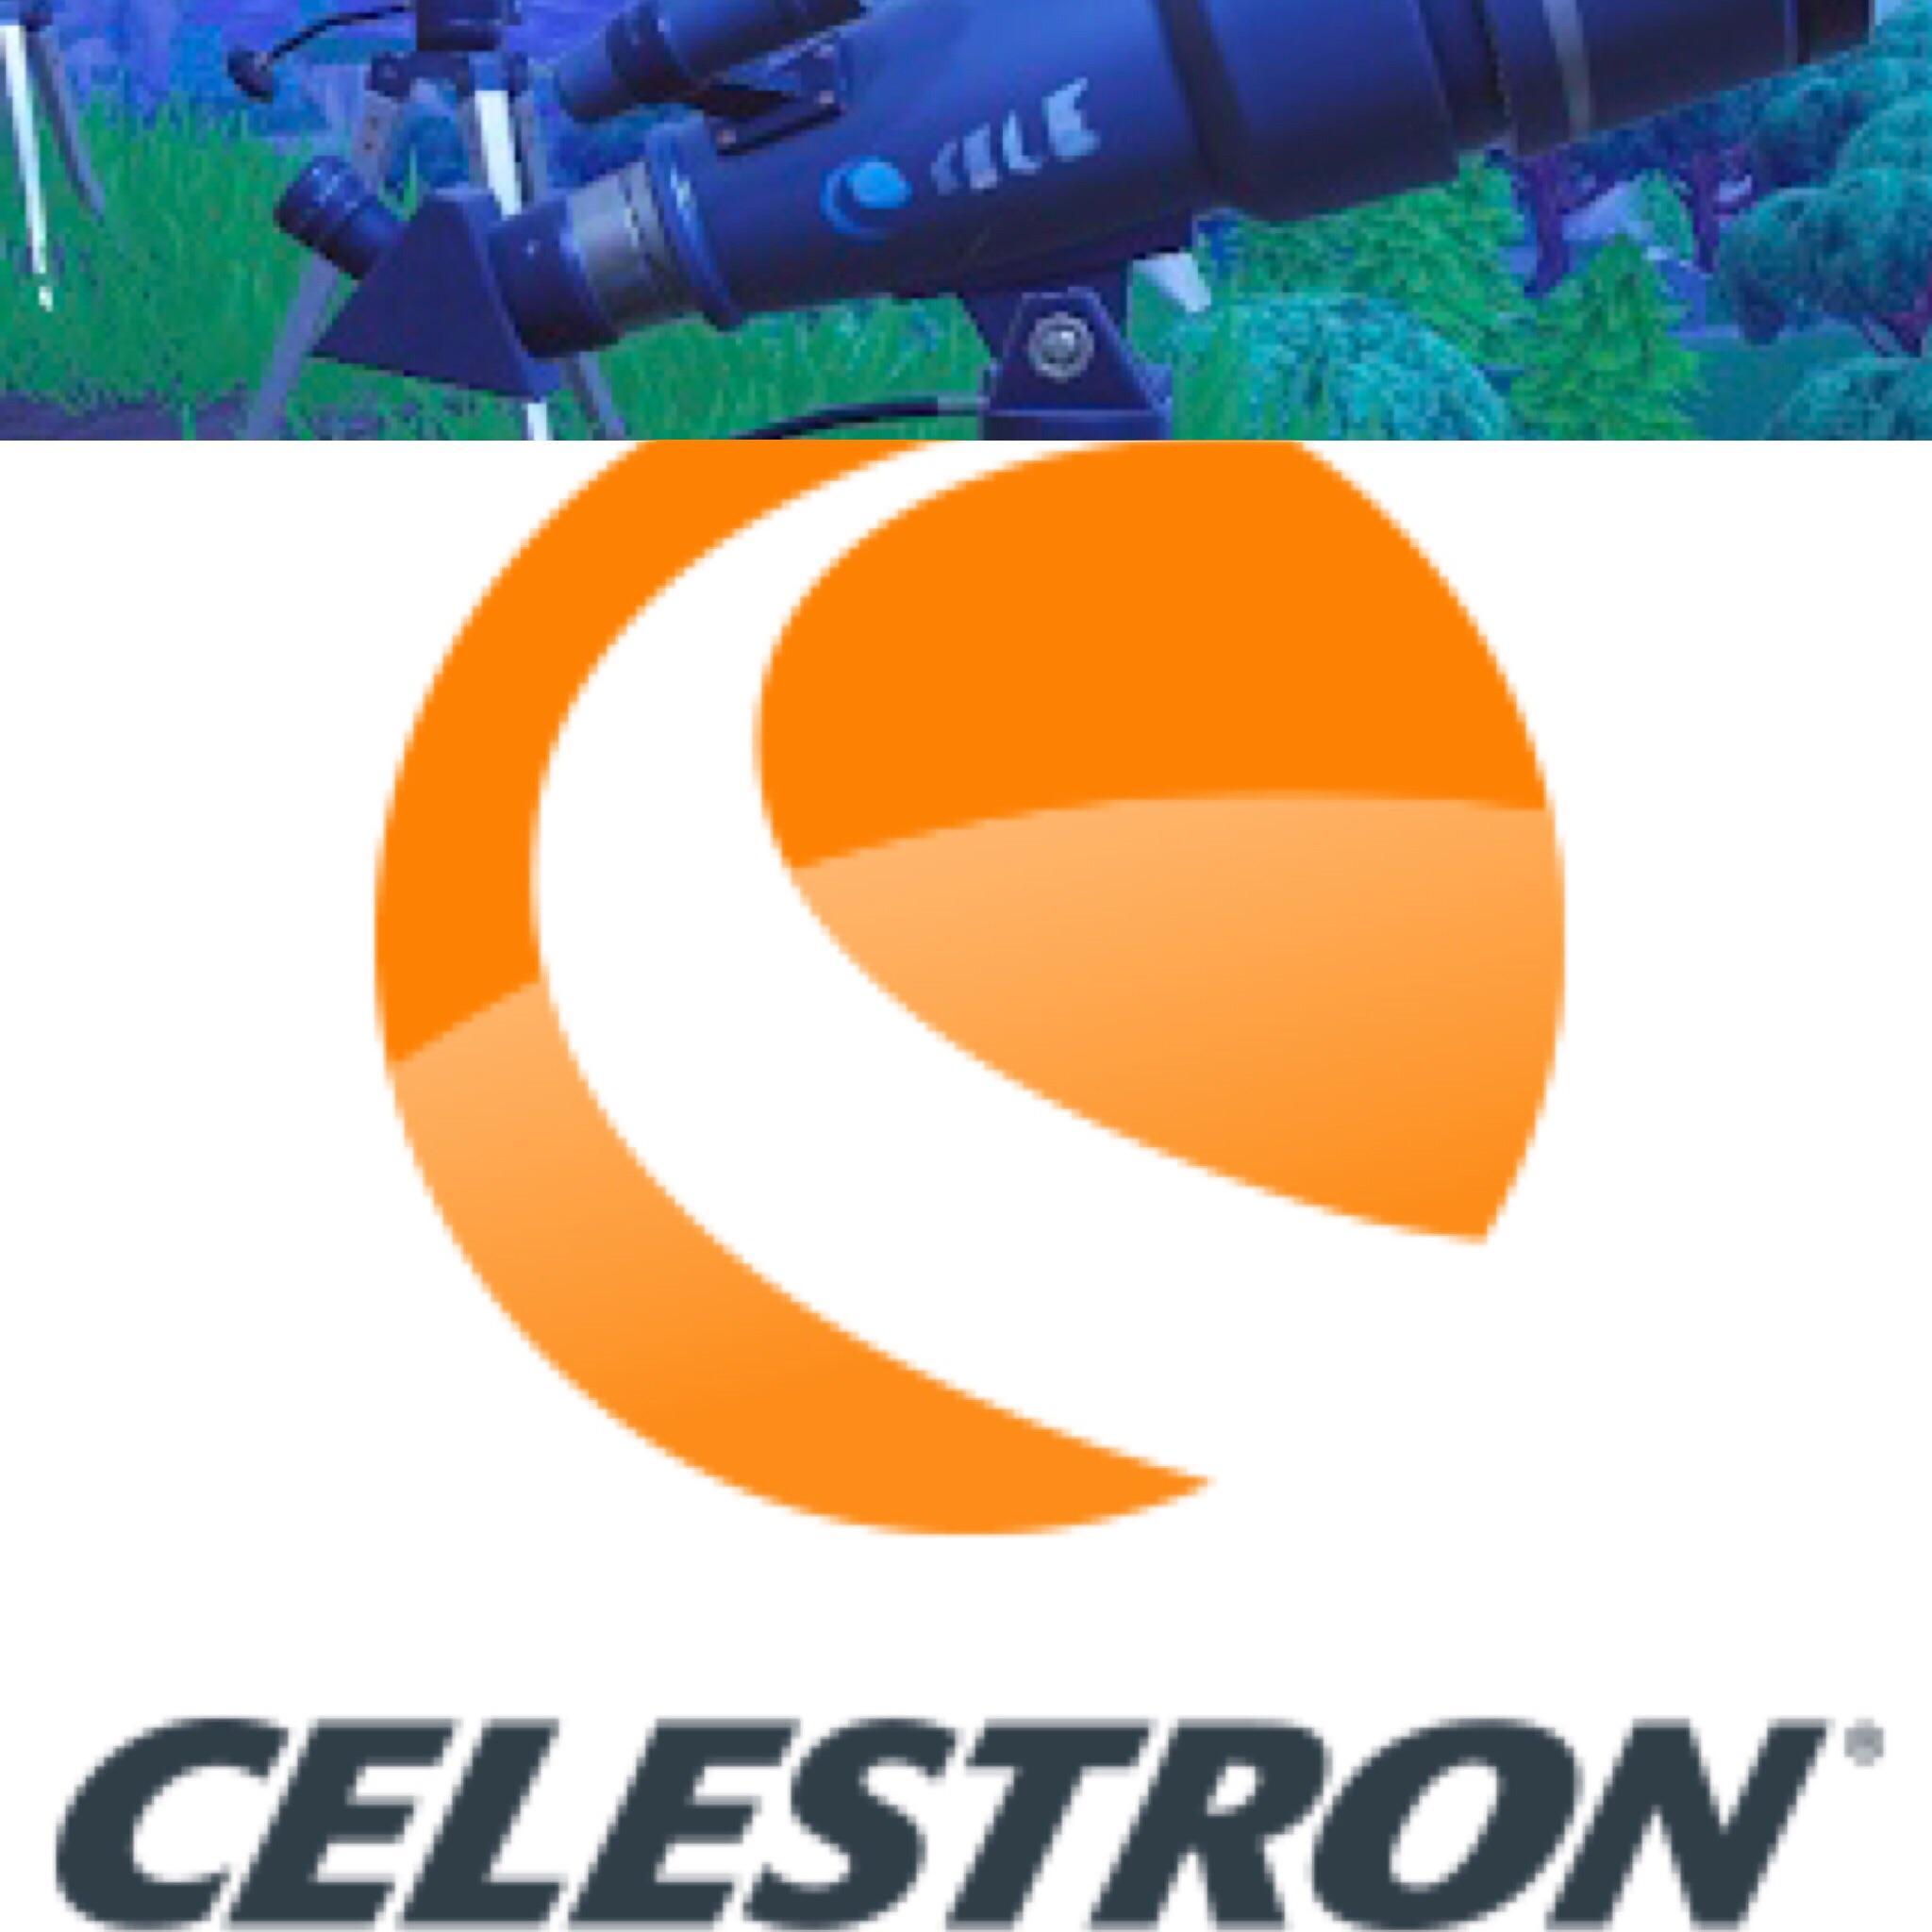 Celestron Logo - NEW EVIDENCE FOR COMIG IN FORTNITE !!!!!!!!I found that the logo on ...